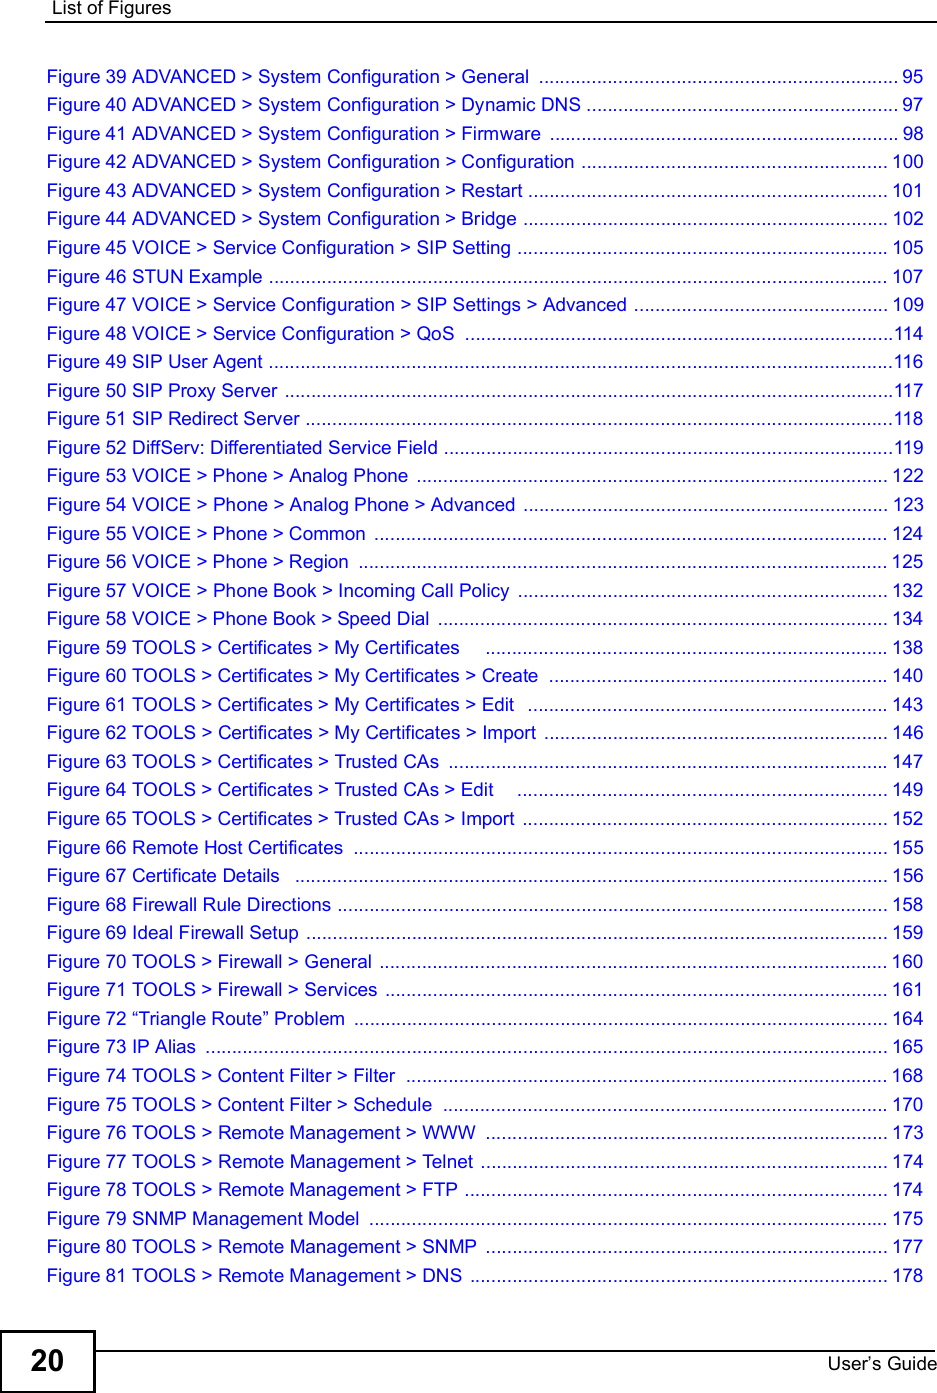 List of FiguresUser s Guide20Figure 39 ADVANCED &gt; System Configuration &gt; General ....................................................................95Figure 40 ADVANCED &gt; System Configuration &gt; Dynamic DNS ...........................................................97Figure 41 ADVANCED &gt; System Configuration &gt; Firmware ..................................................................98Figure 42 ADVANCED &gt; System Configuration &gt; Configuration ..........................................................100Figure 43 ADVANCED &gt; System Configuration &gt; Restart ....................................................................101Figure 44 ADVANCED &gt; System Configuration &gt; Bridge .....................................................................102Figure 45 VOICE &gt; Service Configuration &gt; SIP Setting ......................................................................105Figure 46 STUN Example .....................................................................................................................107Figure 47 VOICE &gt; Service Configuration &gt; SIP Settings &gt; Advanced ................................................109Figure 48 VOICE &gt; Service Configuration &gt; QoS .................................................................................114Figure 49 SIP User Agent ......................................................................................................................116Figure 50 SIP Proxy Server ...................................................................................................................117Figure 51 SIP Redirect Server ...............................................................................................................118Figure 52 DiffServ: Differentiated Service Field .....................................................................................119Figure 53 VOICE &gt; Phone &gt; Analog Phone .........................................................................................122Figure 54 VOICE &gt; Phone &gt; Analog Phone &gt; Advanced .....................................................................123Figure 55 VOICE &gt; Phone &gt; Common .................................................................................................124Figure 56 VOICE &gt; Phone &gt; Region ....................................................................................................125Figure 57 VOICE &gt; Phone Book &gt; Incoming Call Policy ......................................................................132Figure 58 VOICE &gt; Phone Book &gt; Speed Dial .....................................................................................134Figure 59 TOOLS &gt; Certificates &gt; My Certificates    ............................................................................138Figure 60 TOOLS &gt; Certificates &gt; My Certificates &gt; Create ................................................................140Figure 61 TOOLS &gt; Certificates &gt; My Certificates &gt; Edit  ....................................................................143Figure 62 TOOLS &gt; Certificates &gt; My Certificates &gt; Import .................................................................146Figure 63 TOOLS &gt; Certificates &gt; Trusted CAs ...................................................................................147Figure 64 TOOLS &gt; Certificates &gt; Trusted CAs &gt; Edit    ......................................................................149Figure 65 TOOLS &gt; Certificates &gt; Trusted CAs &gt; Import .....................................................................152Figure 66 Remote Host Certificates .....................................................................................................155Figure 67 Certificate Details  ................................................................................................................156Figure 68 Firewall Rule Directions ........................................................................................................158Figure 69 Ideal Firewall Setup ..............................................................................................................159Figure 70 TOOLS &gt; Firewall &gt; General ................................................................................................160Figure 71 TOOLS &gt; Firewall &gt; Services ...............................................................................................161Figure 72 !Triangle Route&quot; Problem .....................................................................................................164Figure 73 IP Alias .................................................................................................................................165Figure 74 TOOLS &gt; Content Filter &gt; Filter ...........................................................................................168Figure 75 TOOLS &gt; Content Filter &gt; Schedule ....................................................................................170Figure 76 TOOLS &gt; Remote Management &gt; WWW ............................................................................173Figure 77 TOOLS &gt; Remote Management &gt; Telnet .............................................................................174Figure 78 TOOLS &gt; Remote Management &gt; FTP ................................................................................174Figure 79 SNMP Management Model ..................................................................................................175Figure 80 TOOLS &gt; Remote Management &gt; SNMP ............................................................................177Figure 81 TOOLS &gt; Remote Management &gt; DNS ...............................................................................178